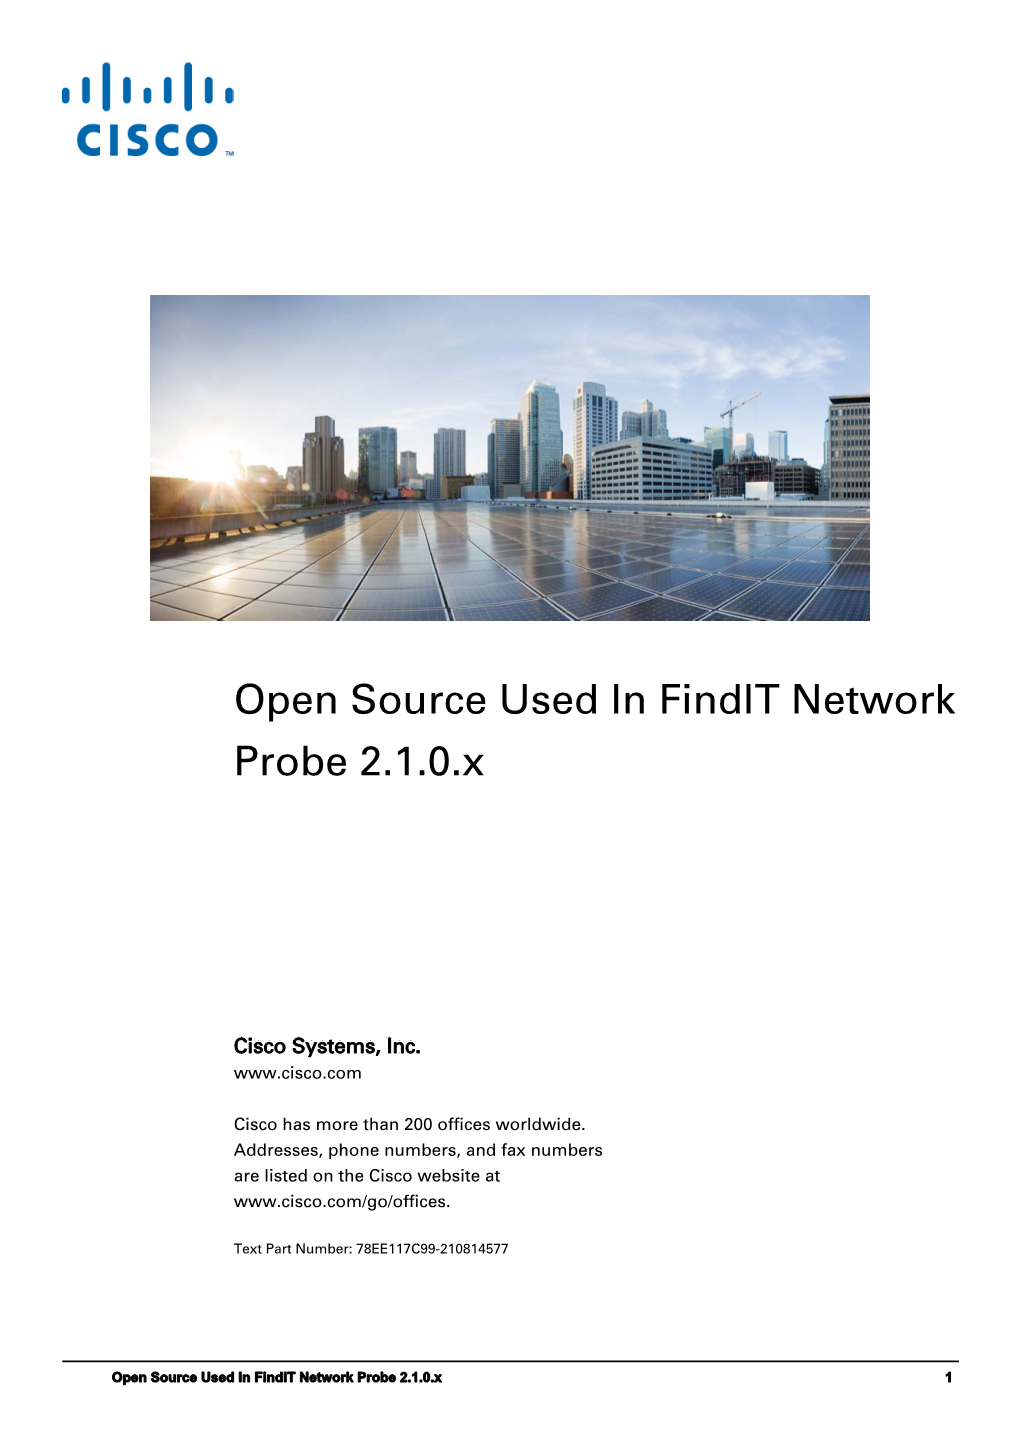 Open Source Used in Findit Network Probe 2.1.0.X